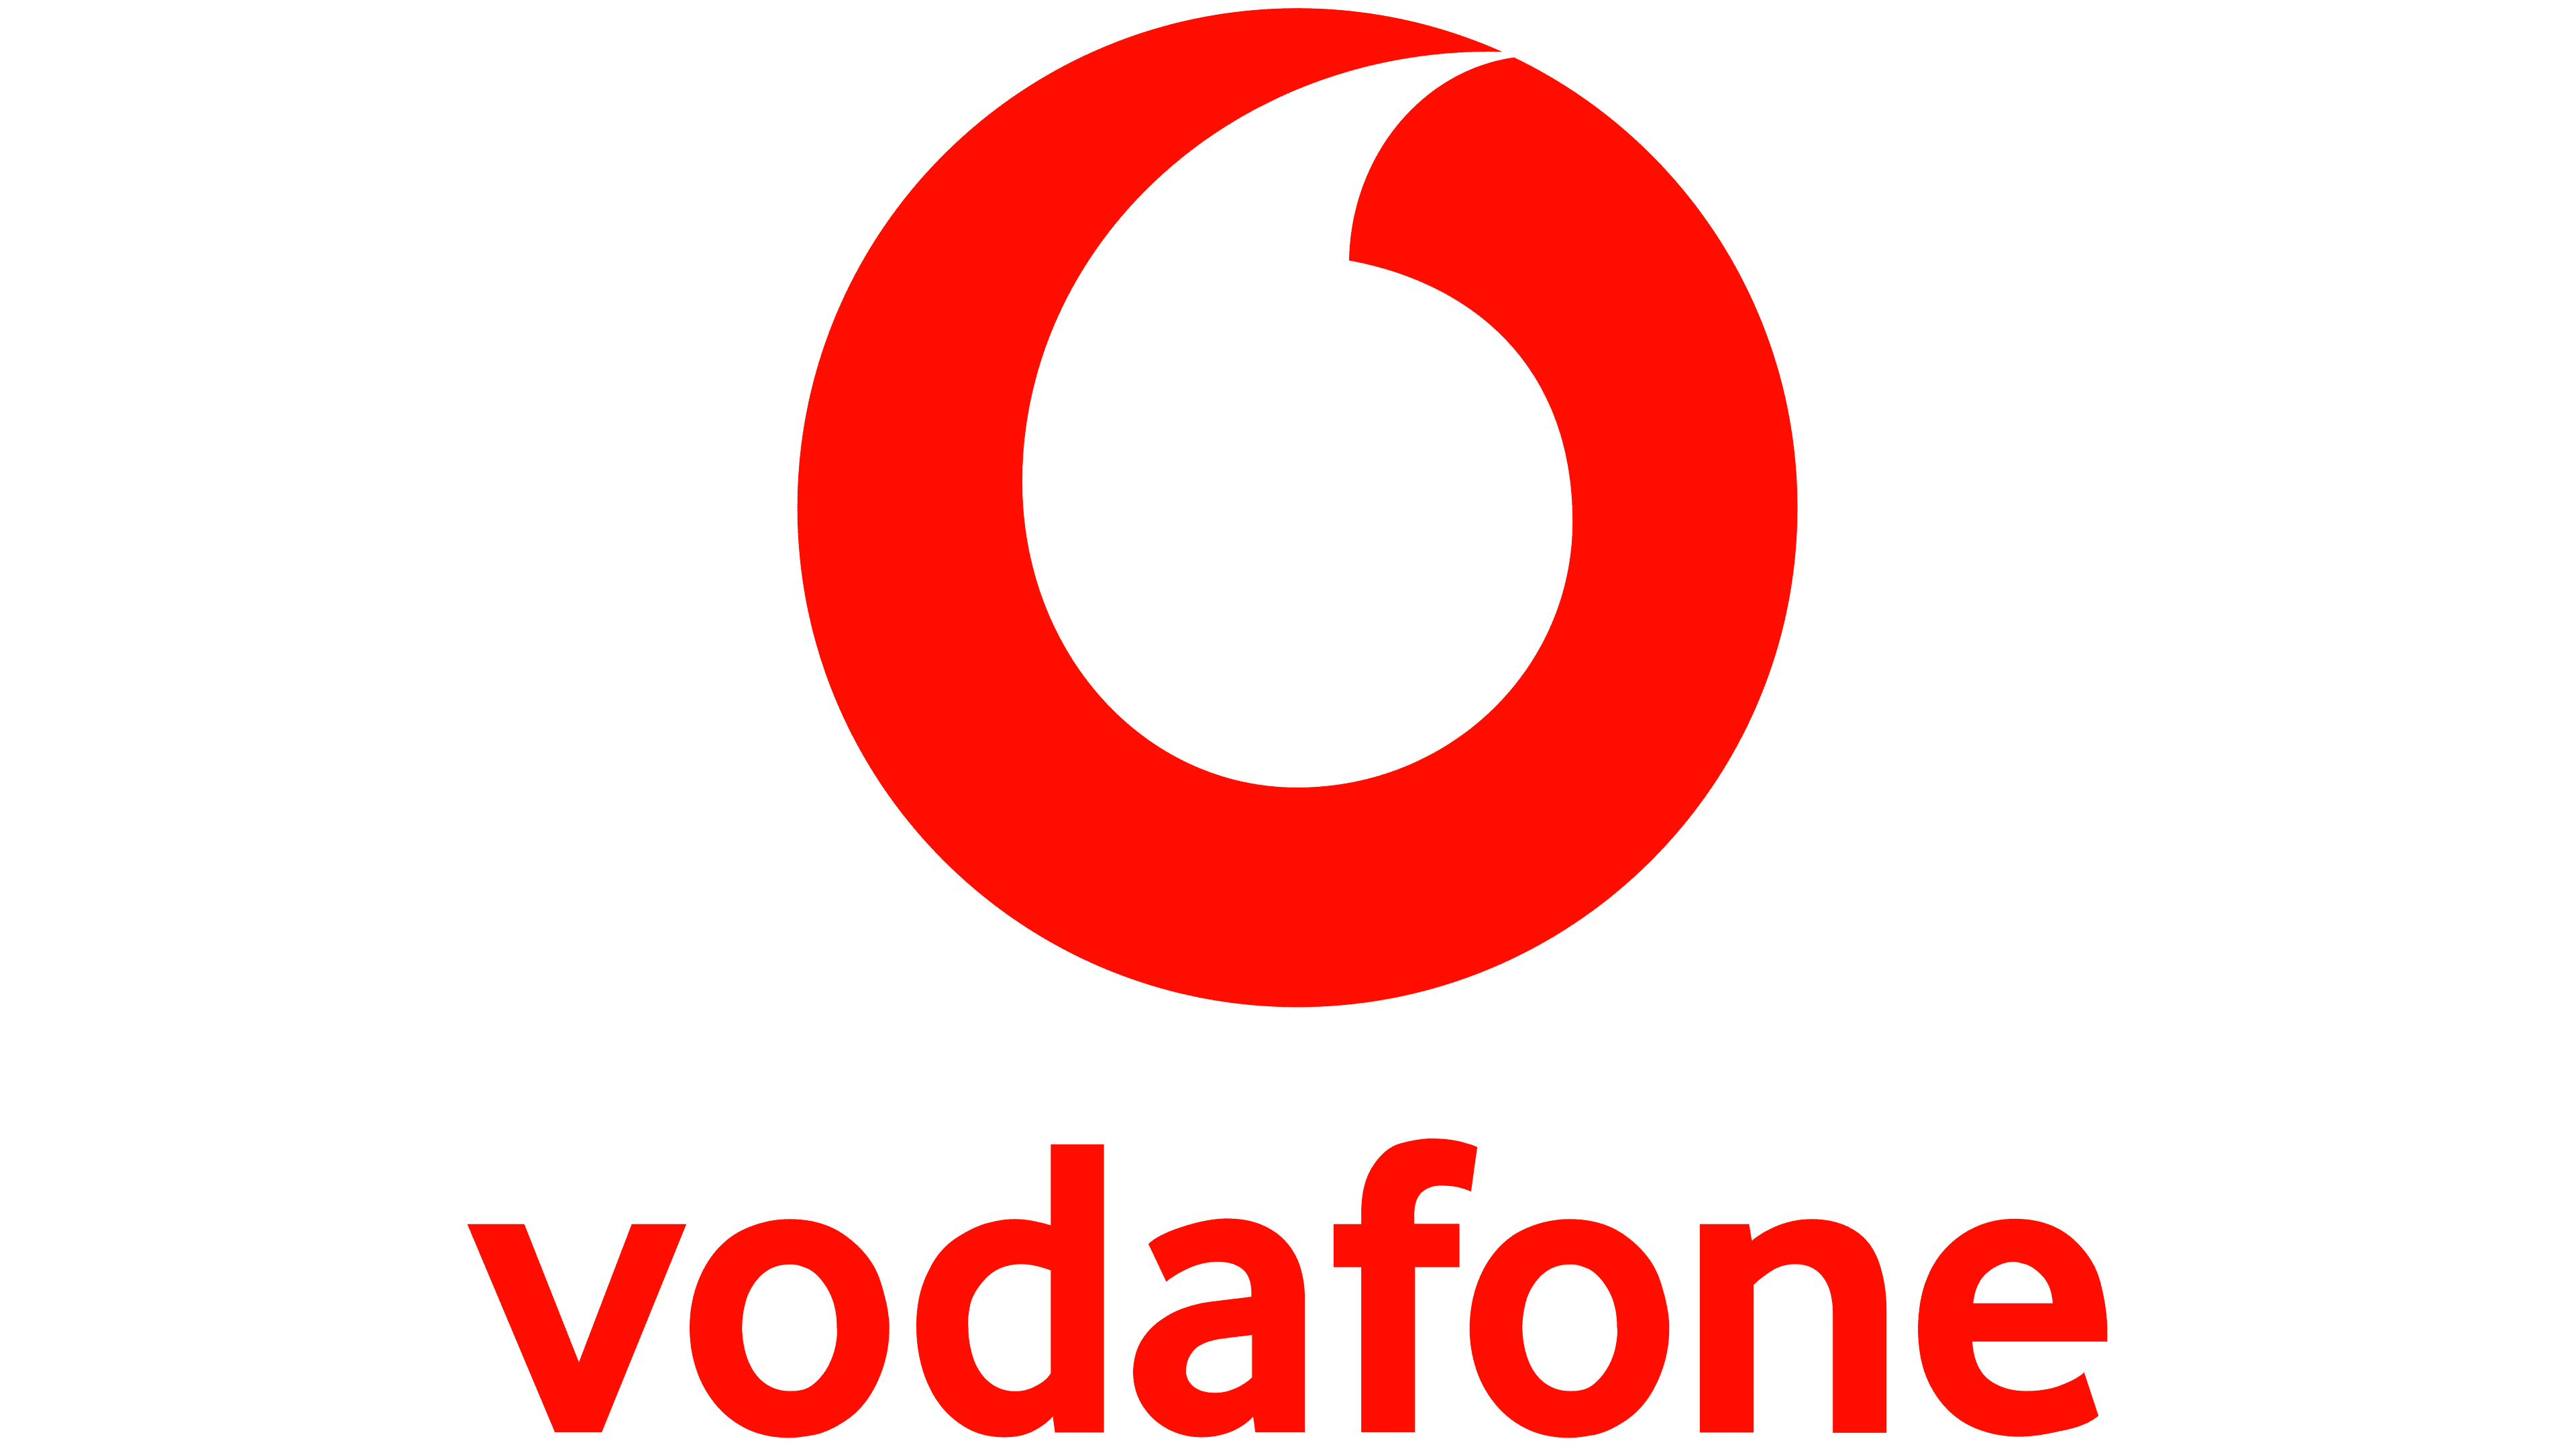 Opposition Demands Gov't Drop Vodafone Hungary Purchase Plans